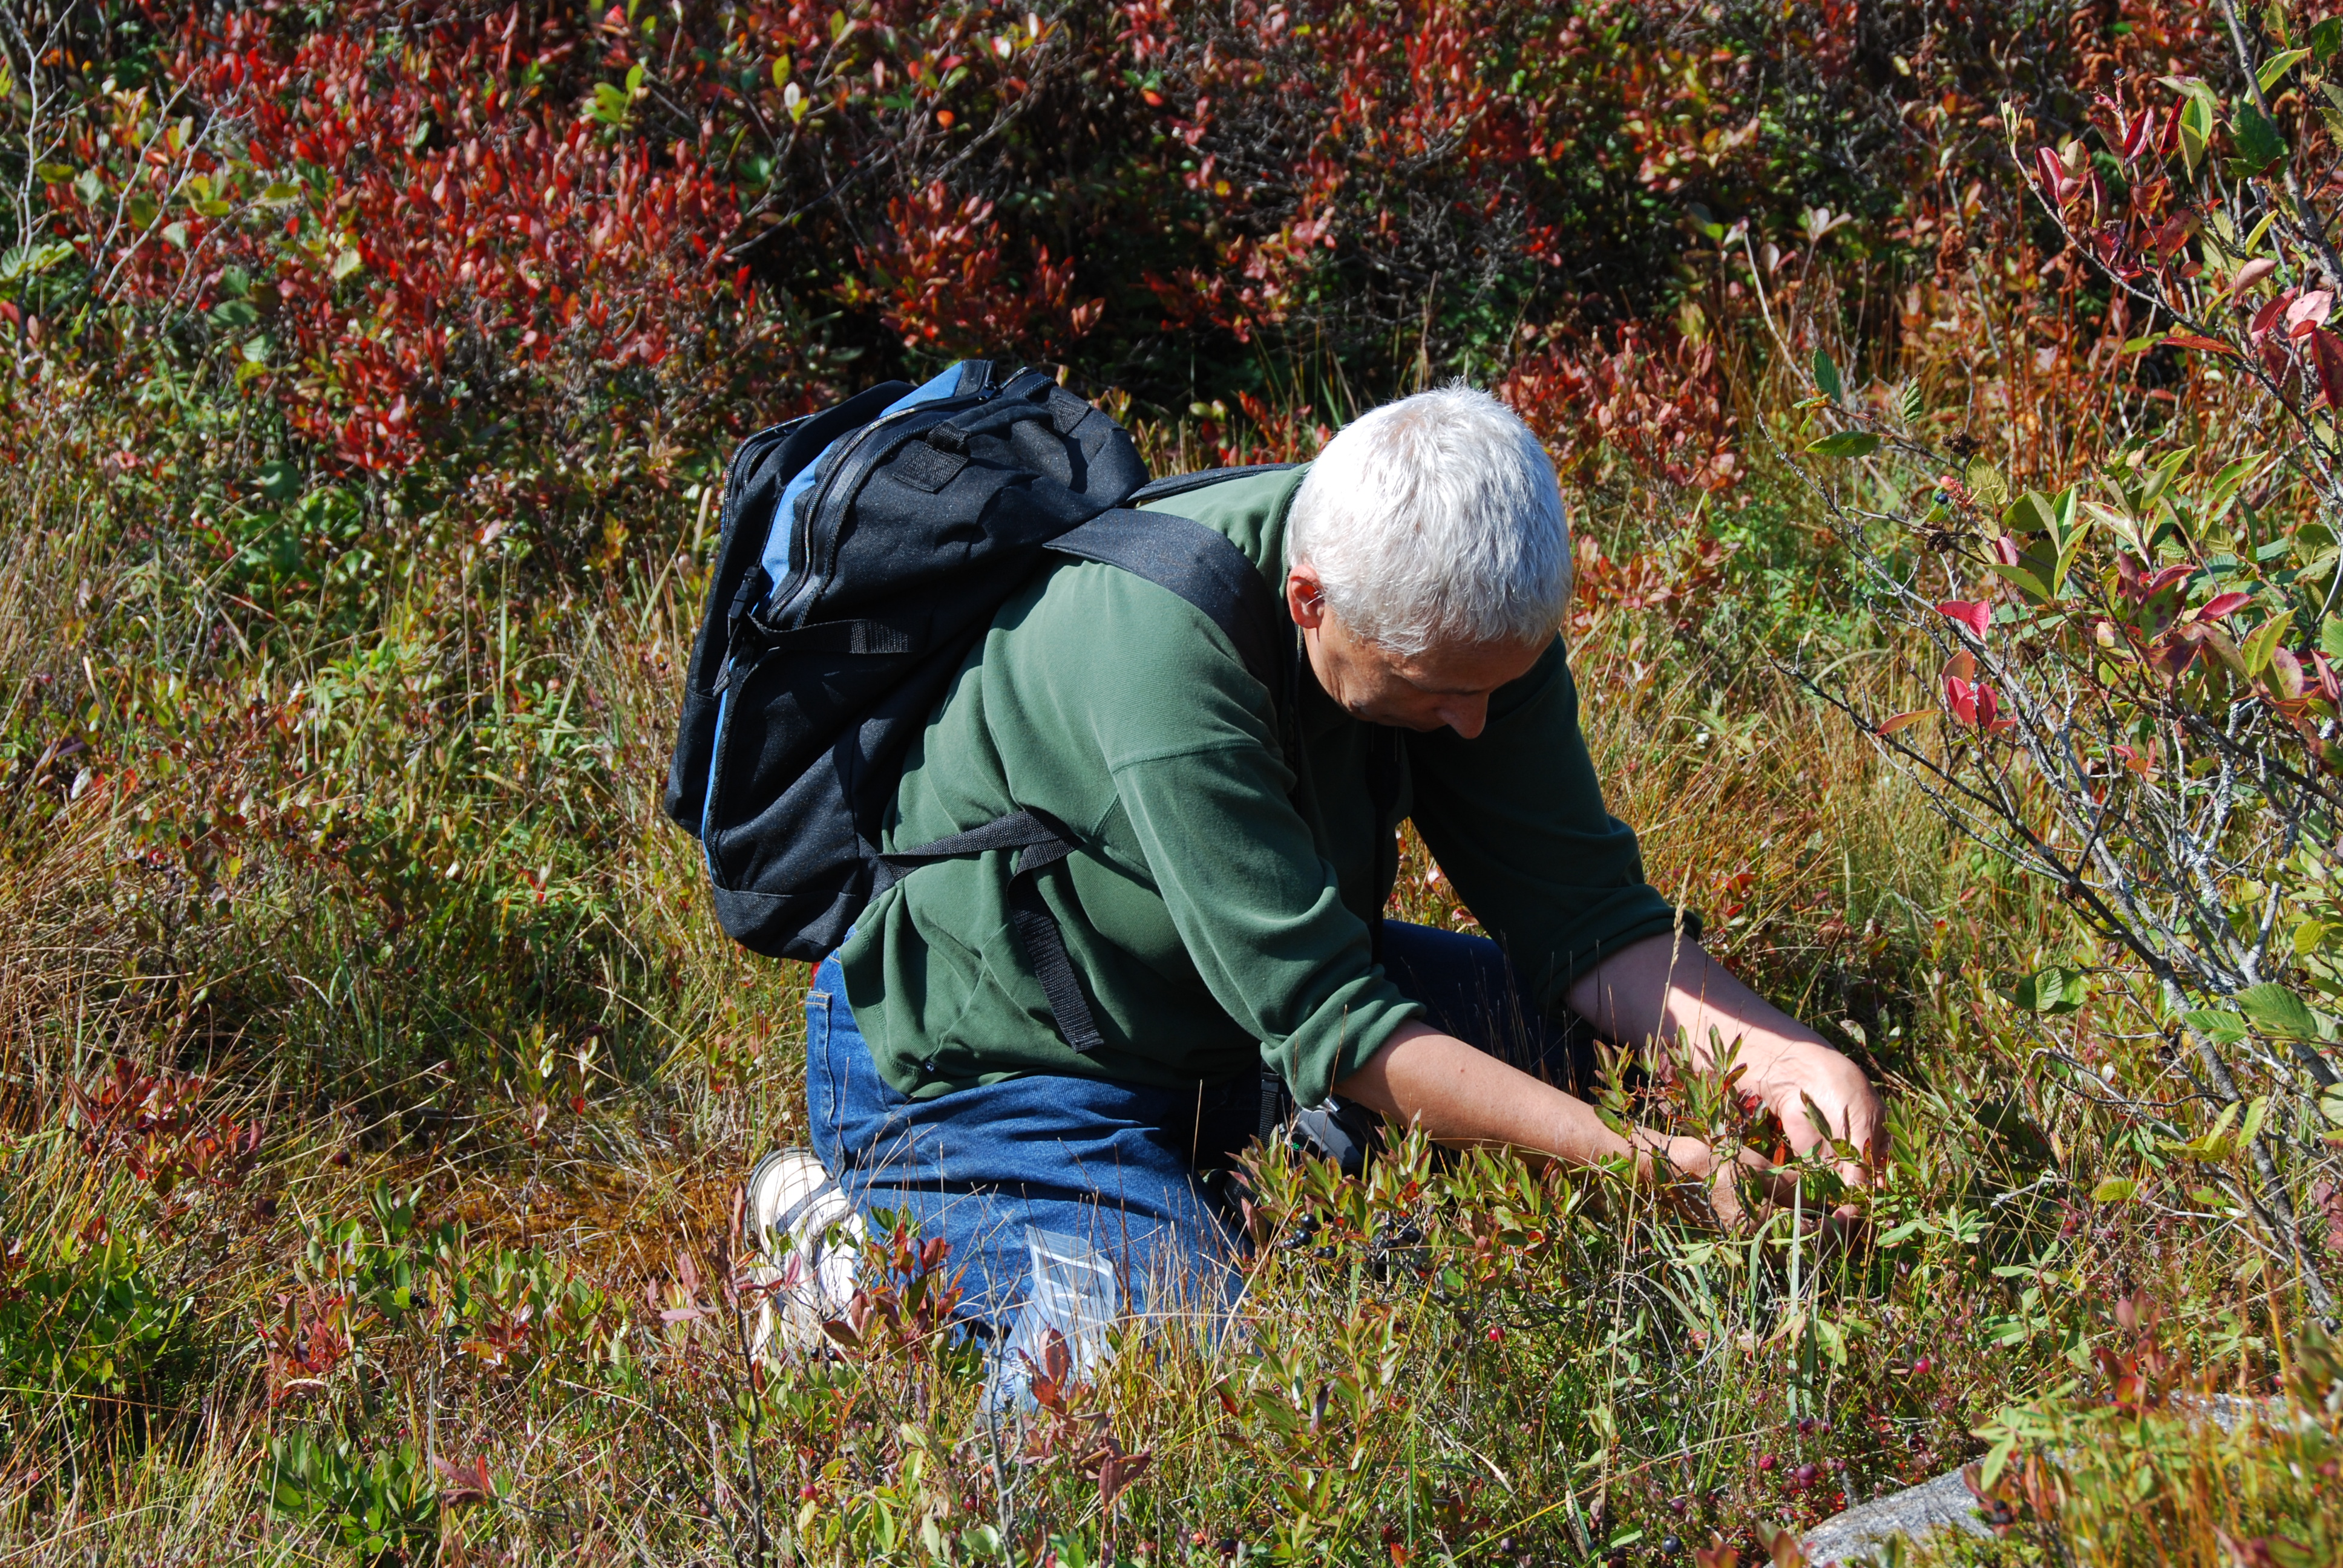 Collecting plant samples in a meadow.